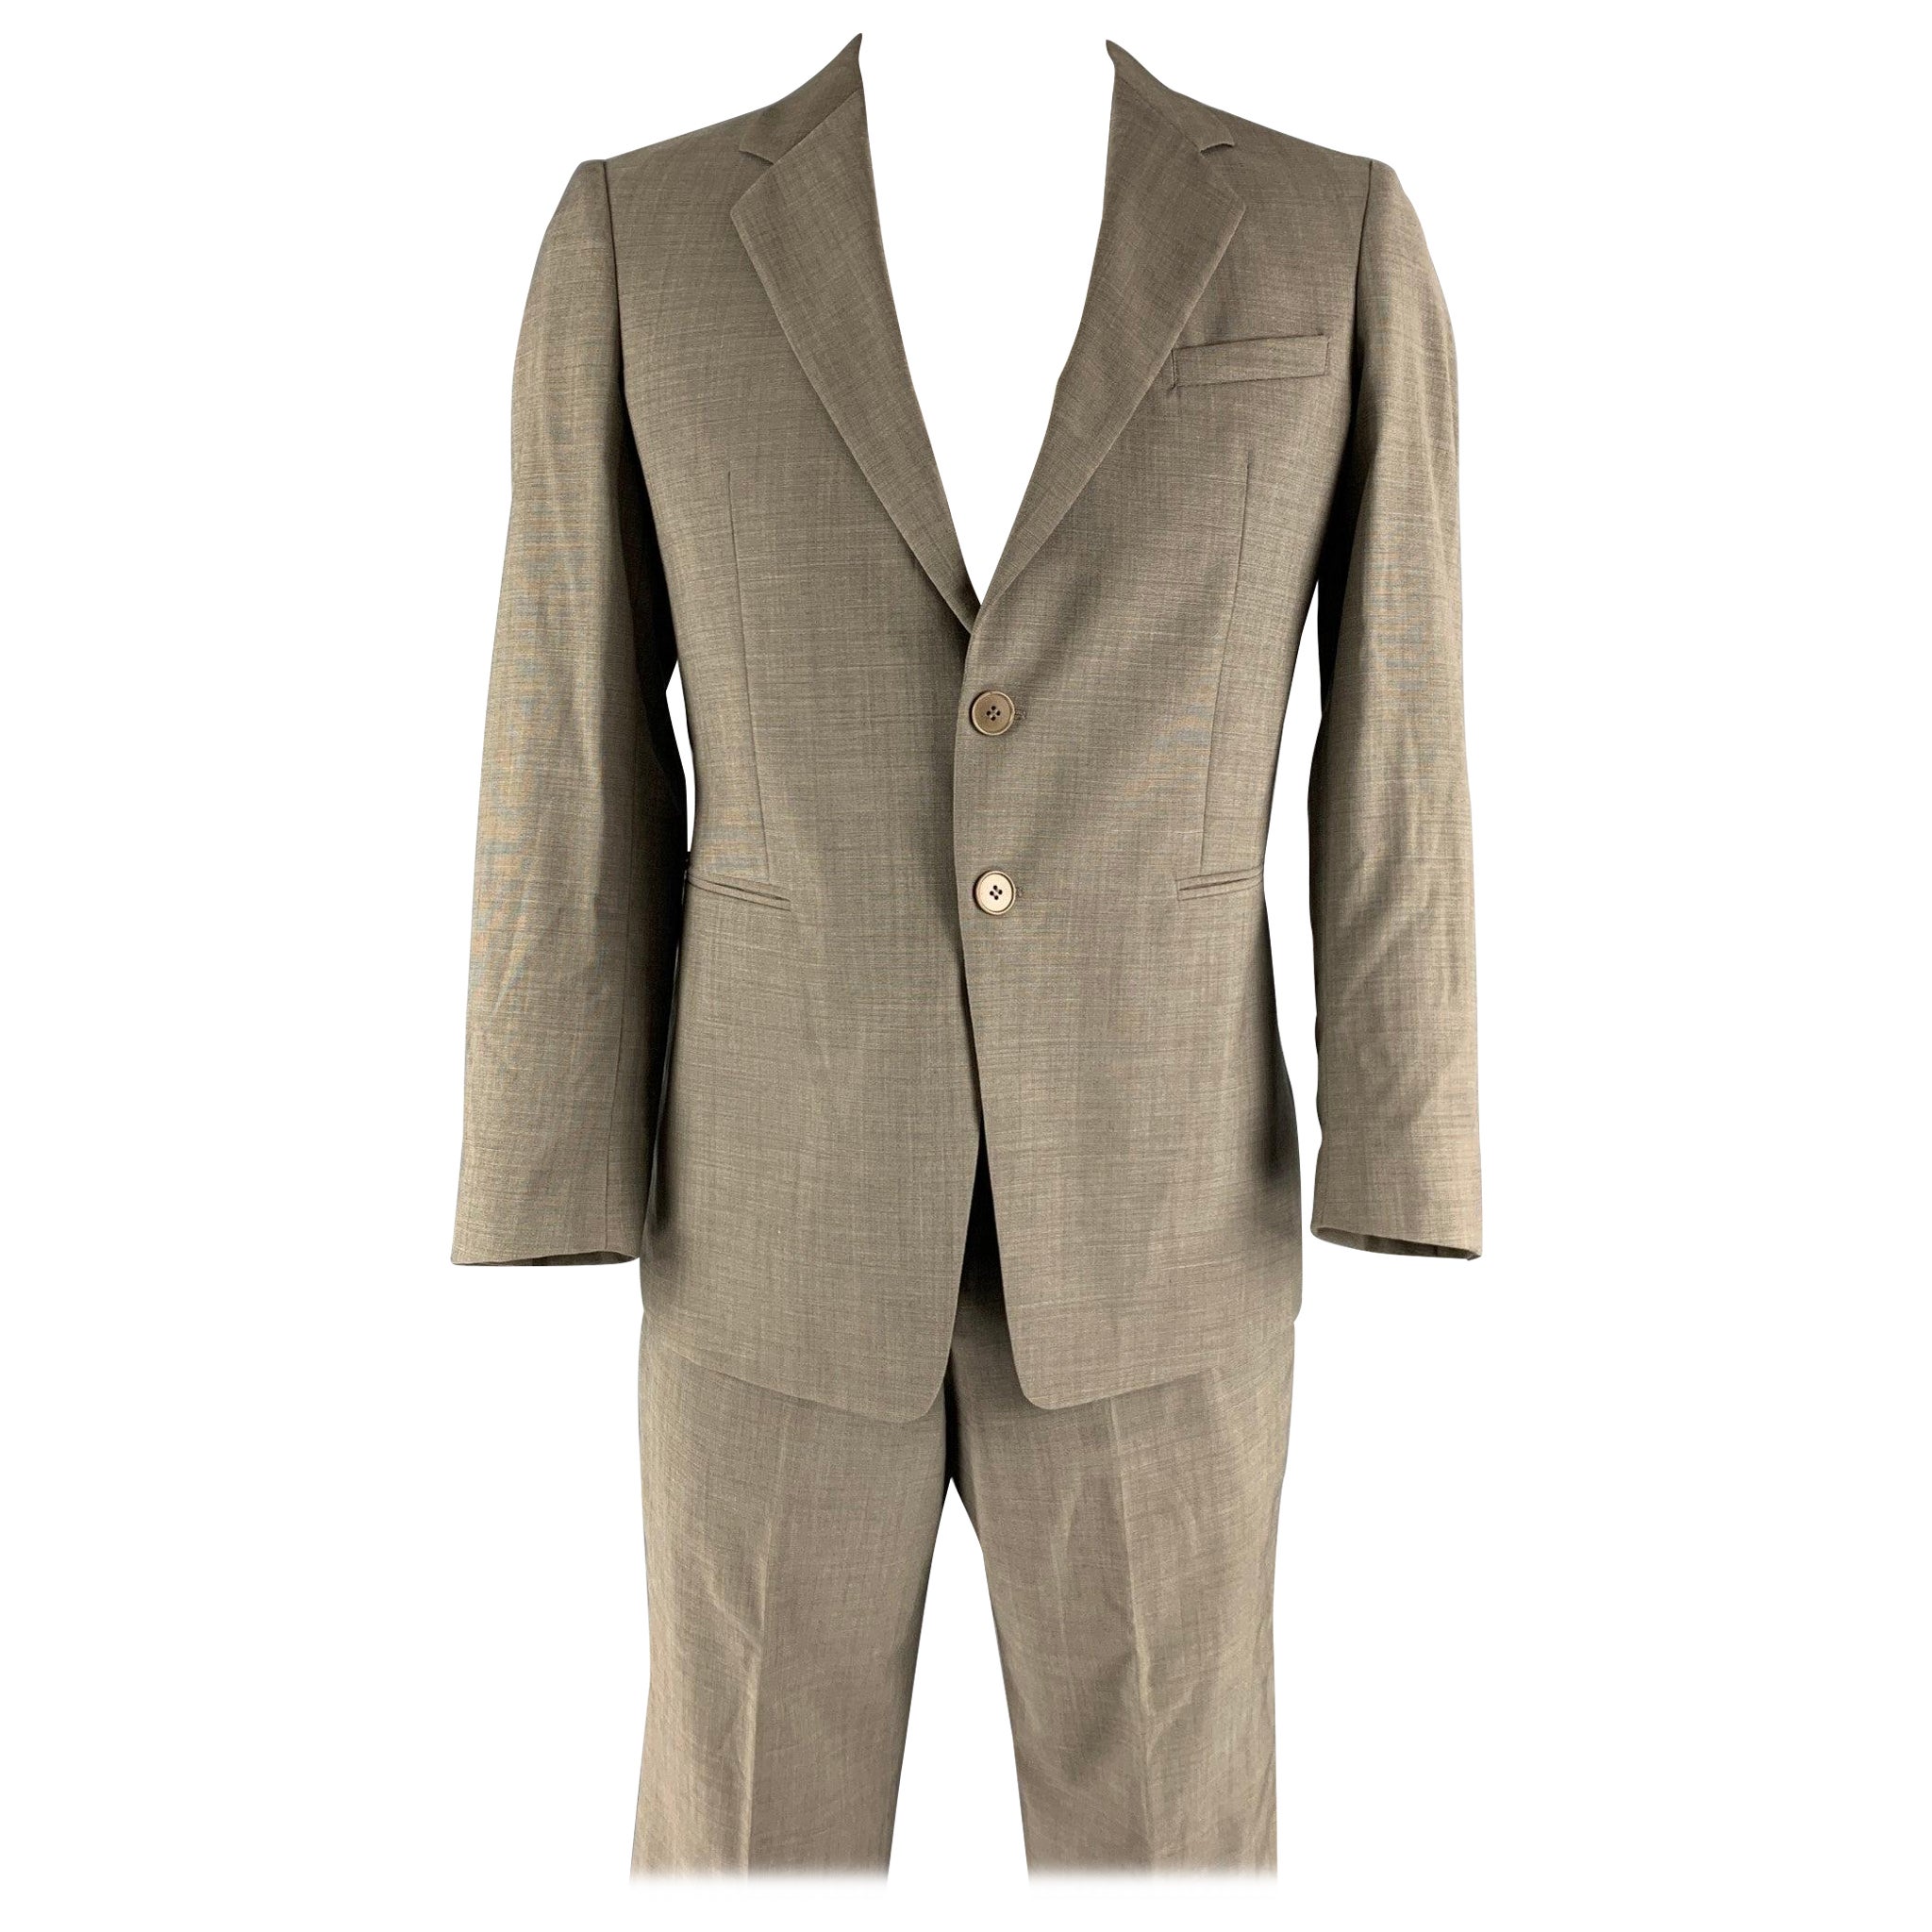 EMPORIO ARMANI Size 42 Taupe Solid Wool Notch Lapel Suit For Sale